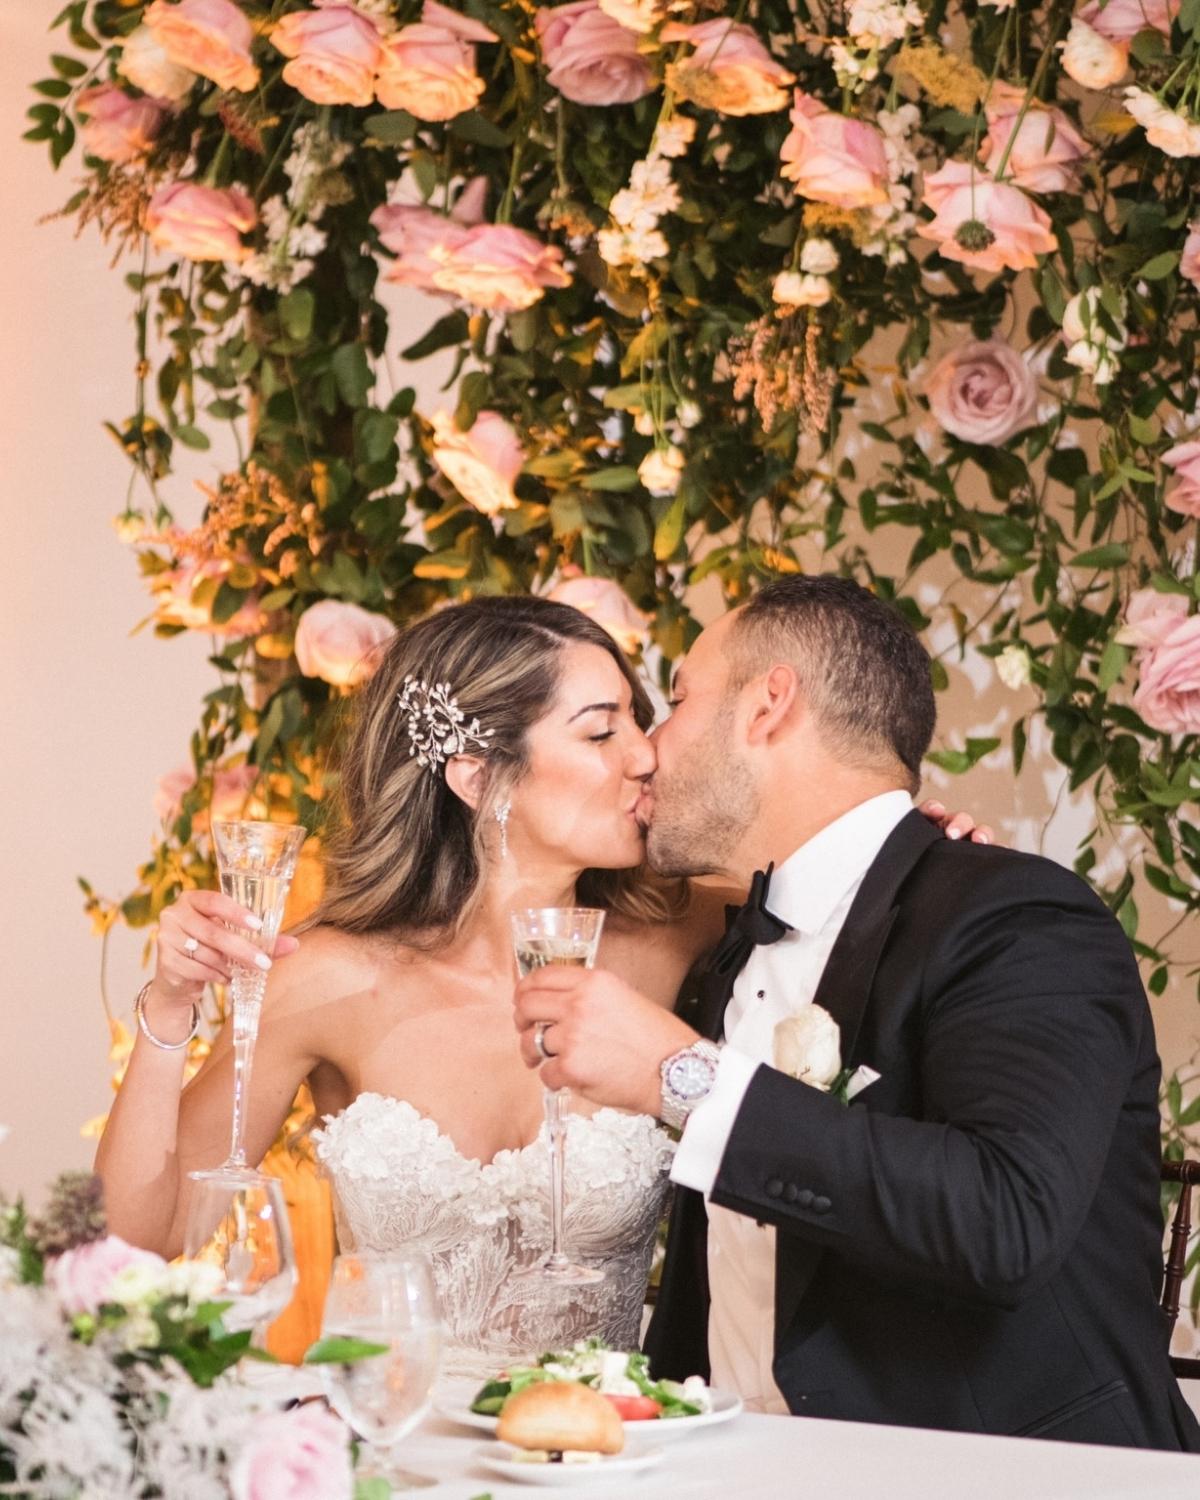 A couple at his wedding ceremony holding glasses of champagne. And kissing each other